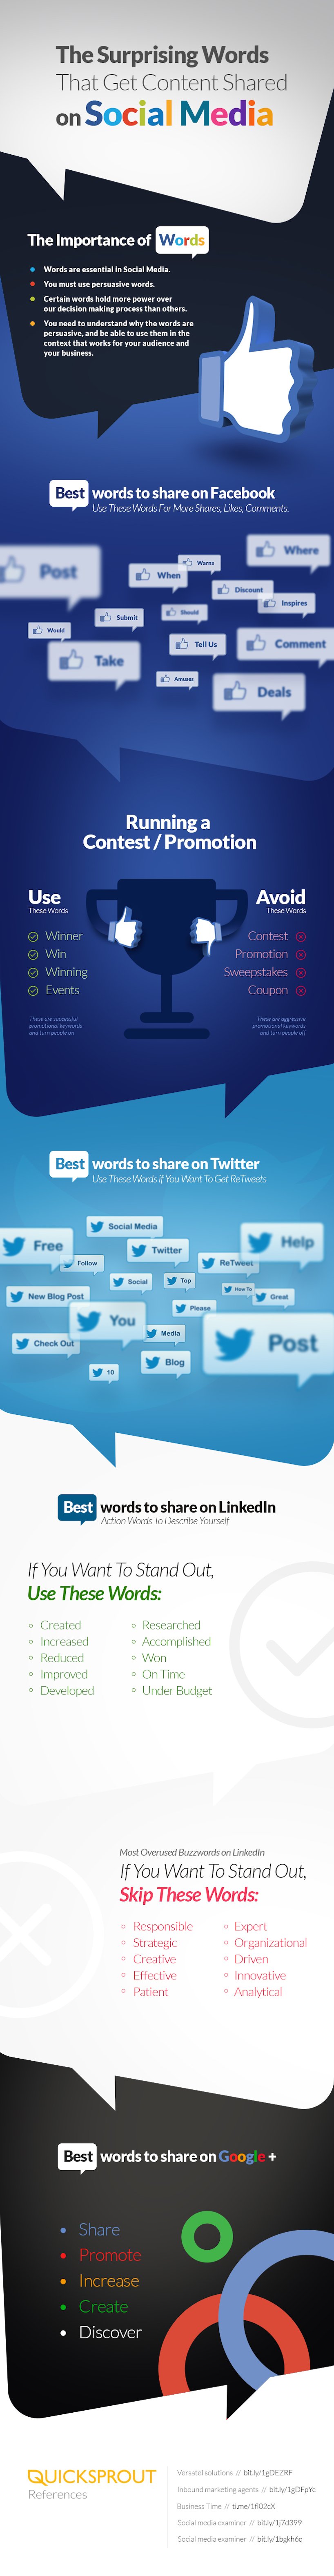 Surprising words that get content shared infographic